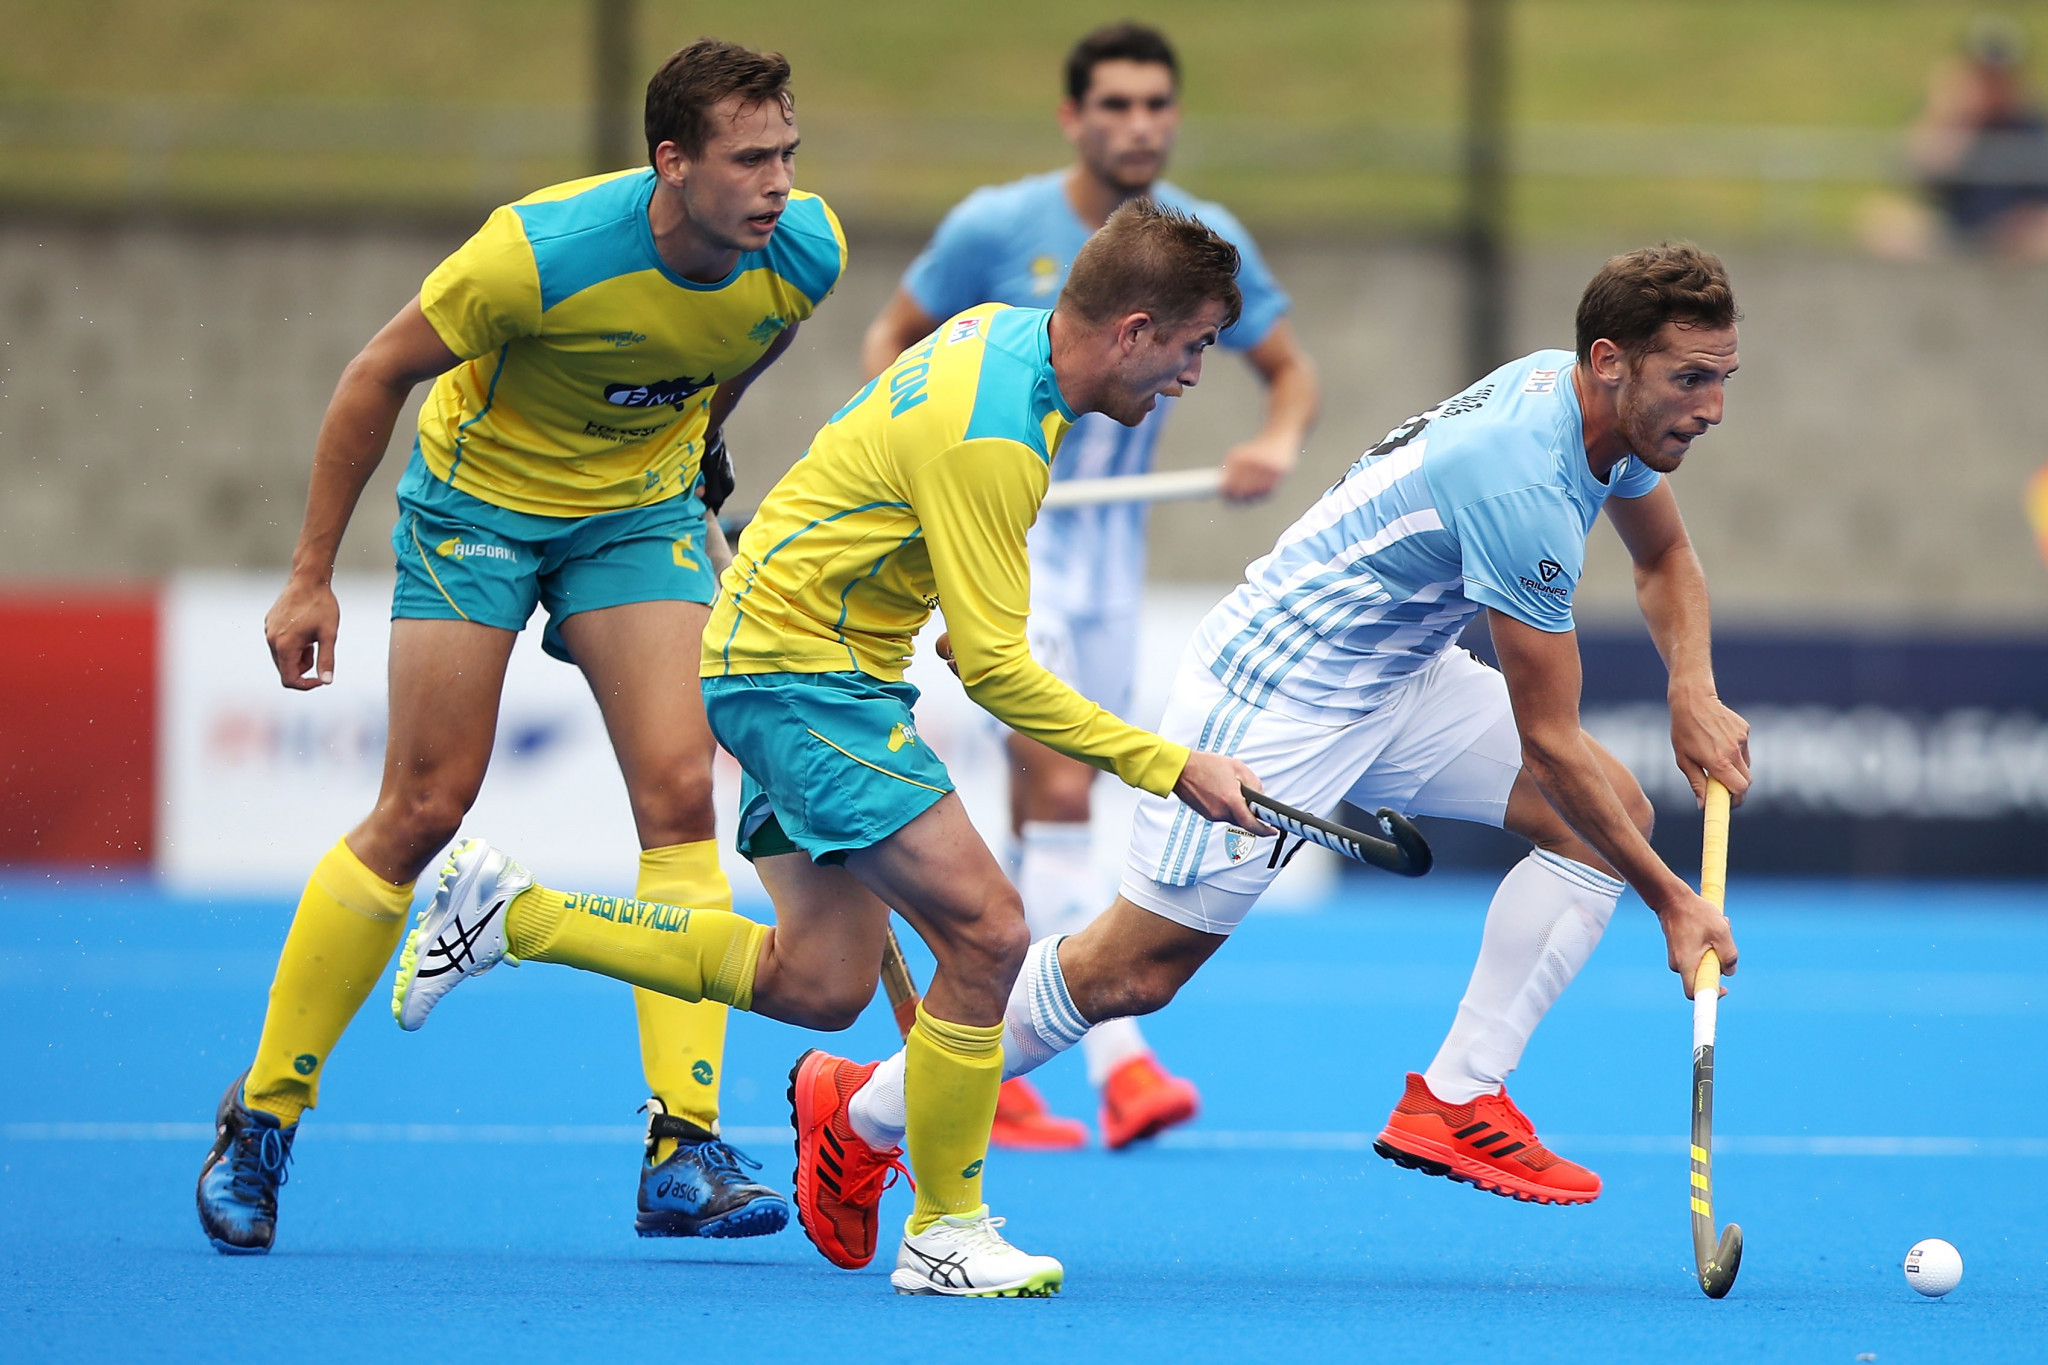 Australia defeated Argentina 3-2 in the men's FIH Pro League in Sydney ©Getty Images